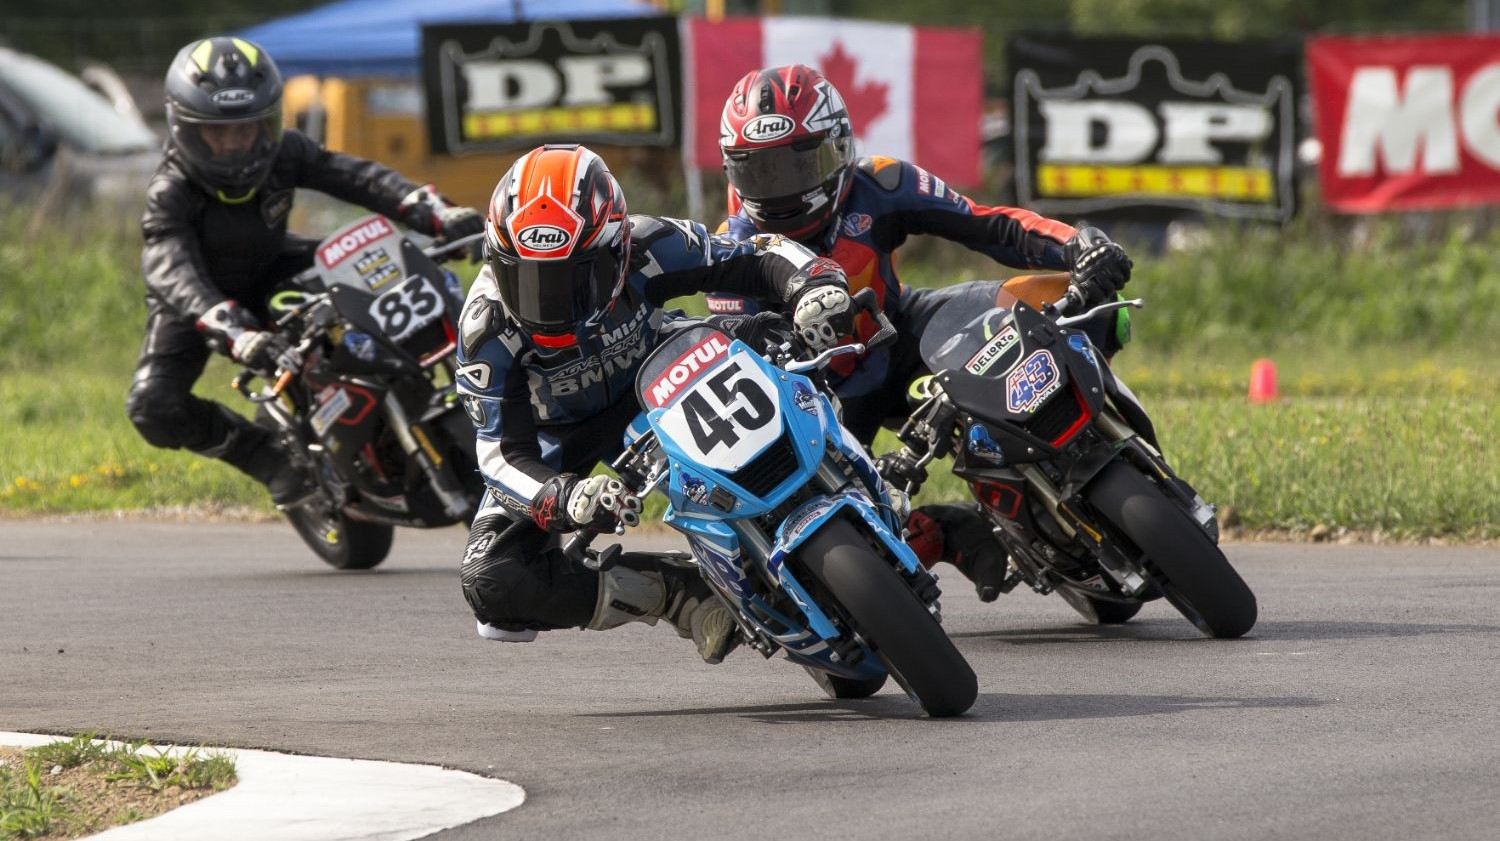 Ashton Parker (45) leading an FIM MiniGP Canada race in Ontario. Photo by Colin Fraser.